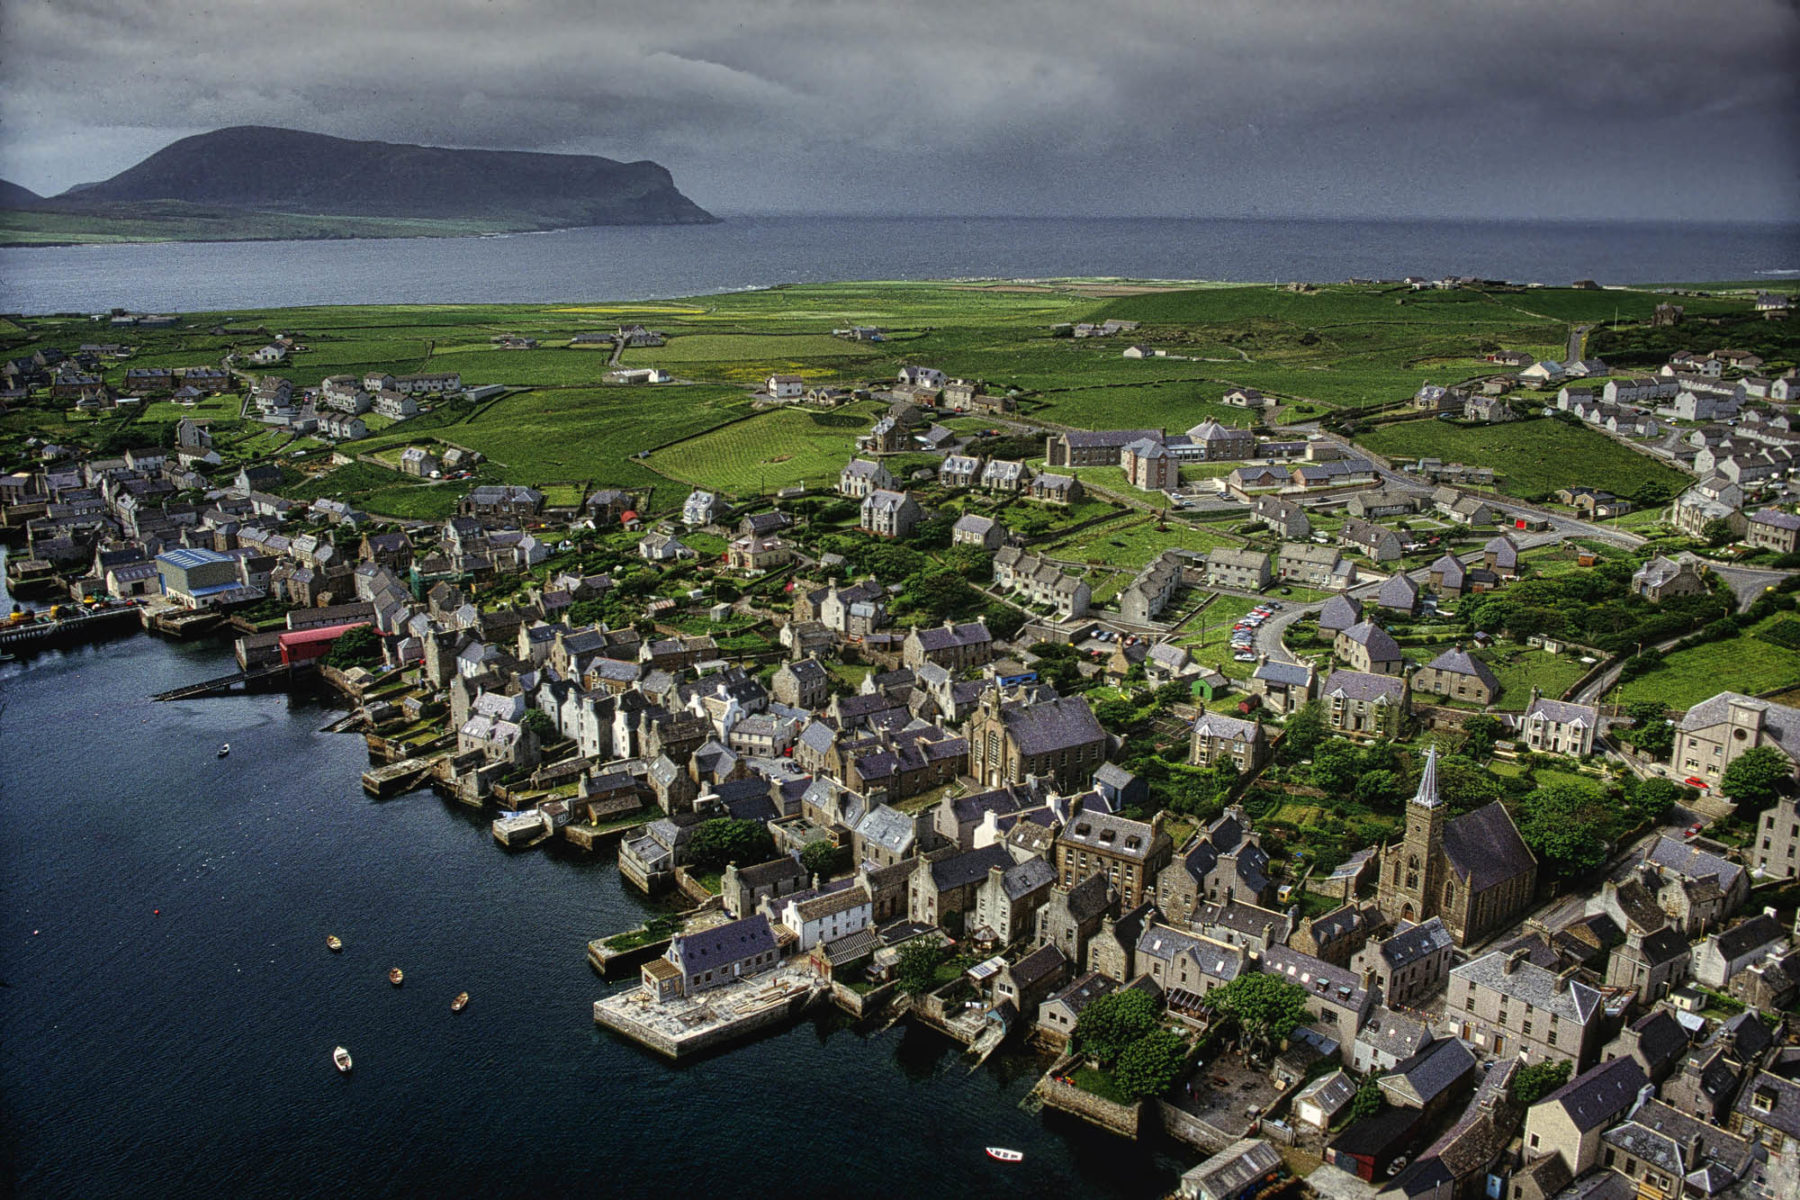 Stromness, Orkney from the air, by Richardson. Piers just into the sea and behind the town a view to the island of Hoy